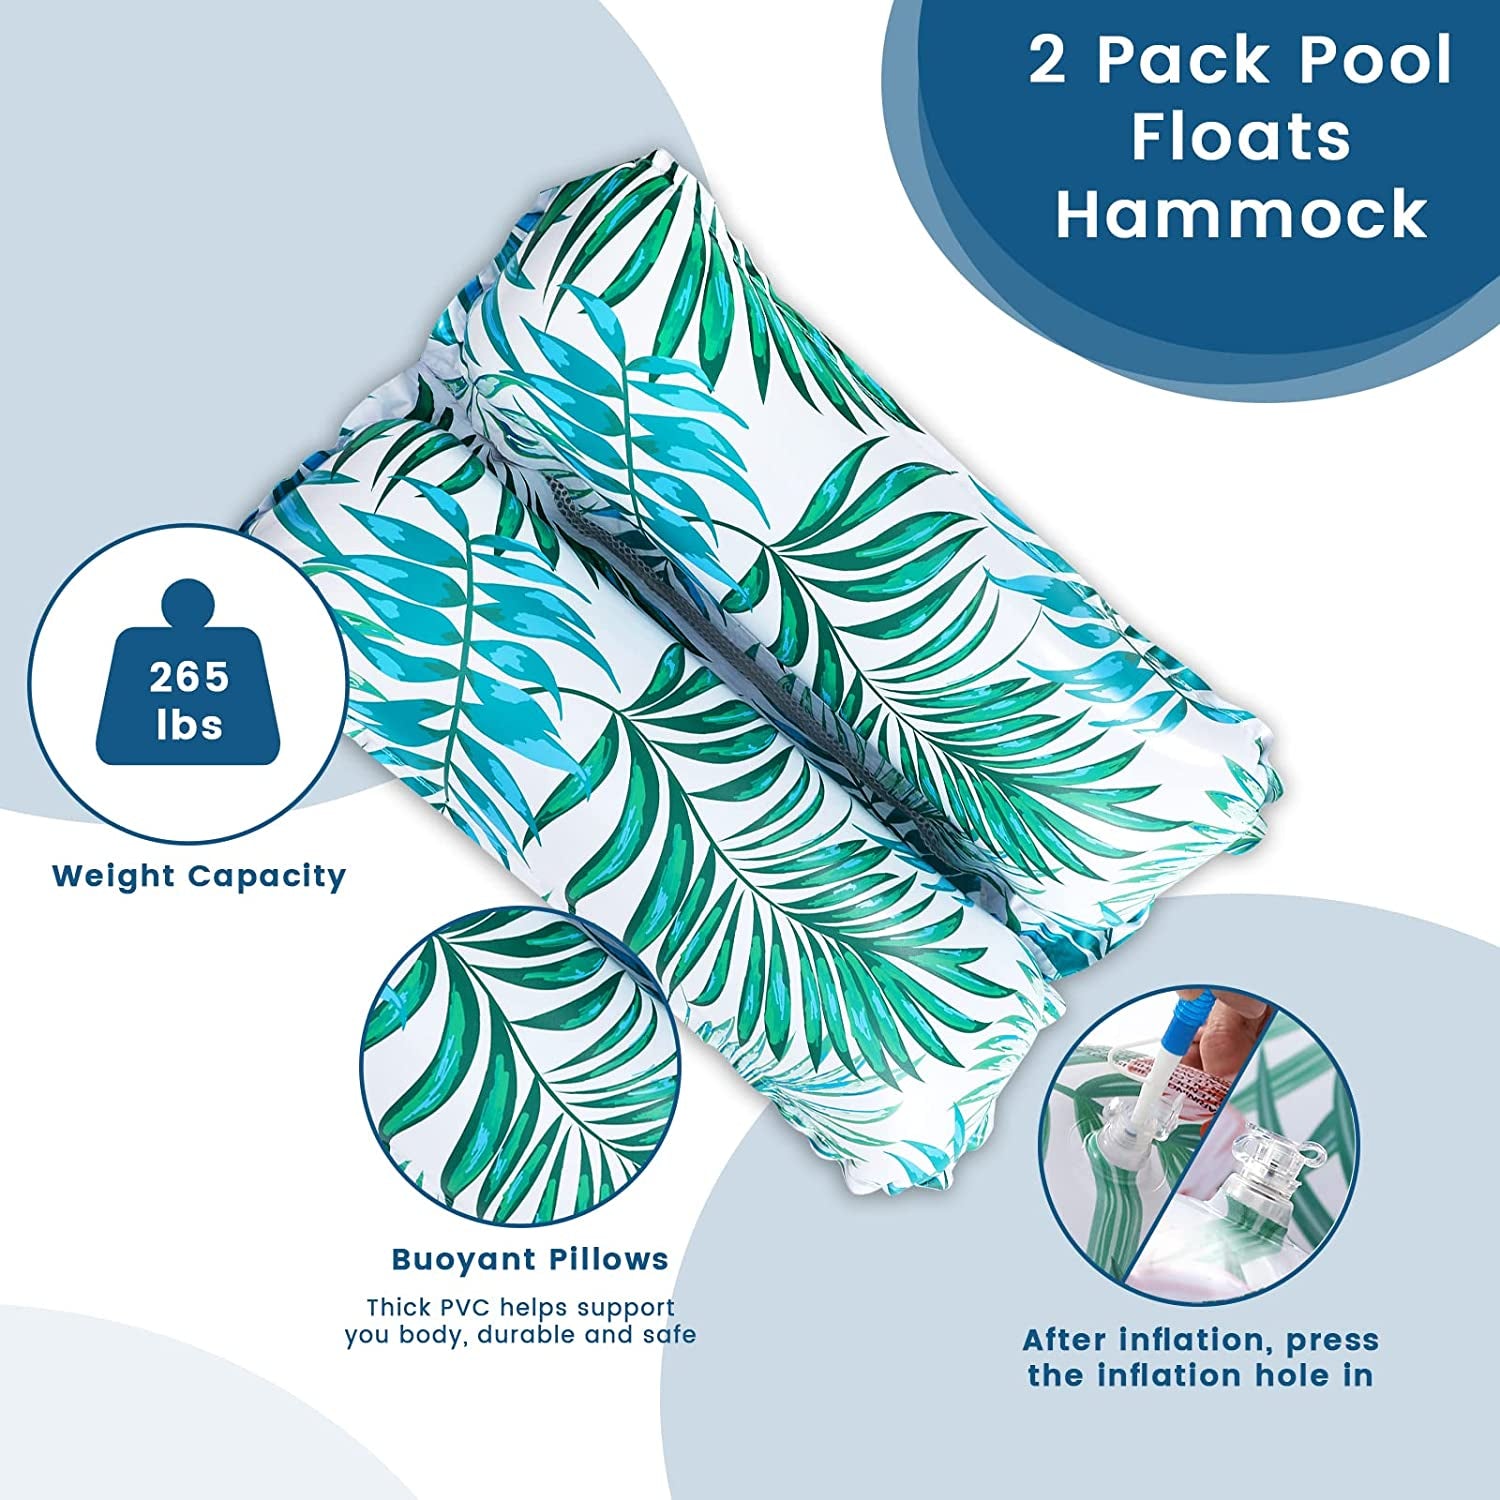 Pool Floats - 2 Pack Water Hammock Swimming Pool Float, Water Hammock Lounger, Inflatable Pool Floats, 4-in-1 Swimming Pool Floaties (Saddle, Lounge Chair, Hammock, Drifter), Pool Floats for Adult